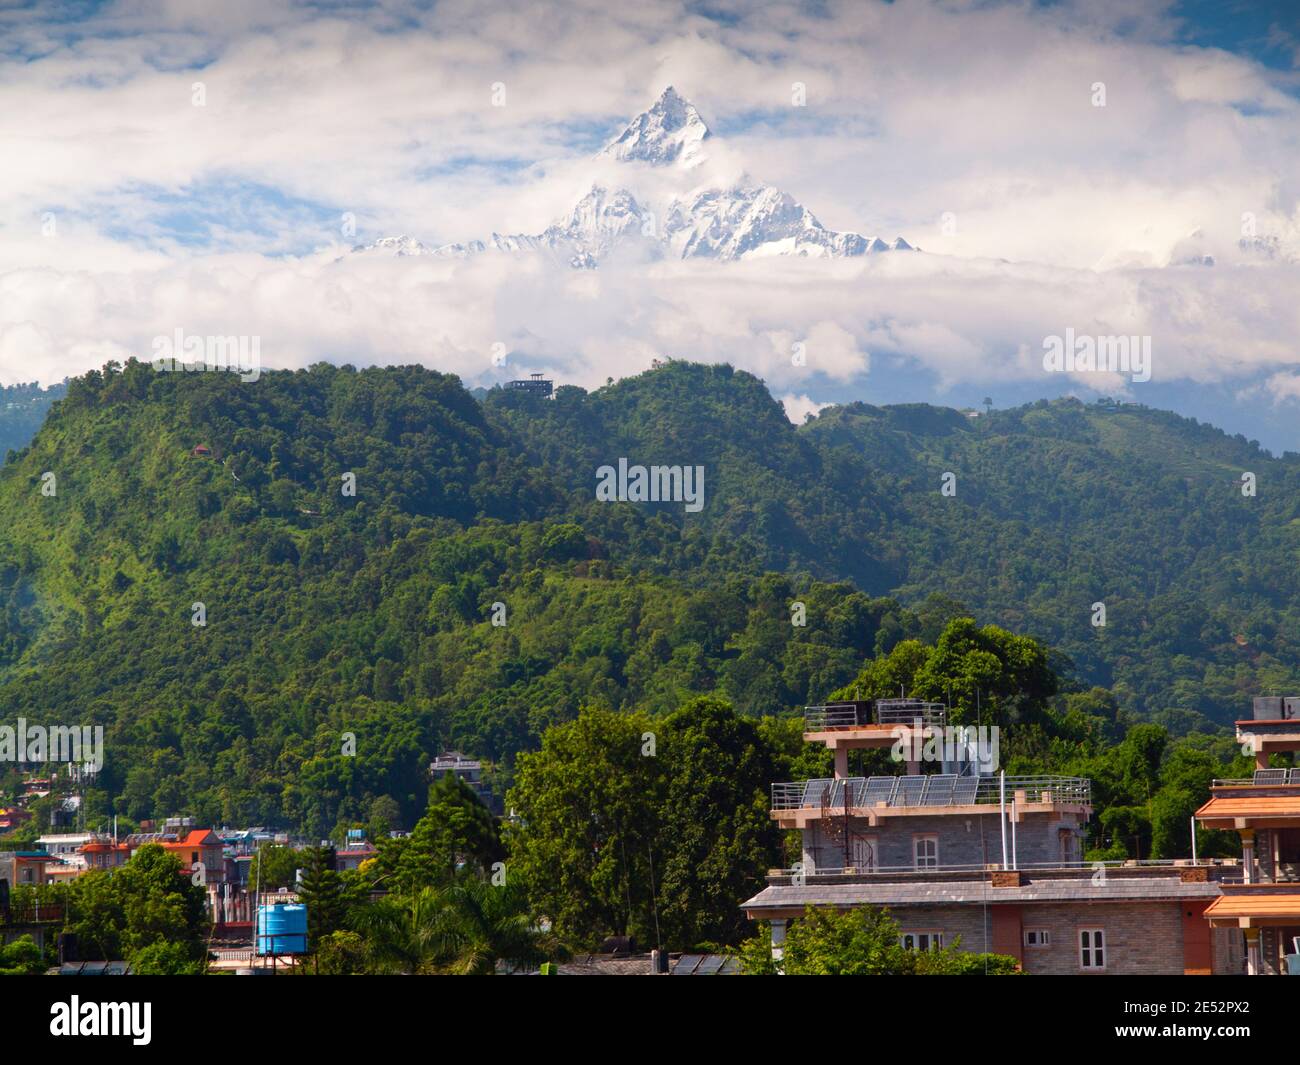 The near-perfect pyramid of Machhapuchhre (6993m) 'fishtail mountain' surrounded by monsoon clouds, Pokhara, Nepal Stock Photo